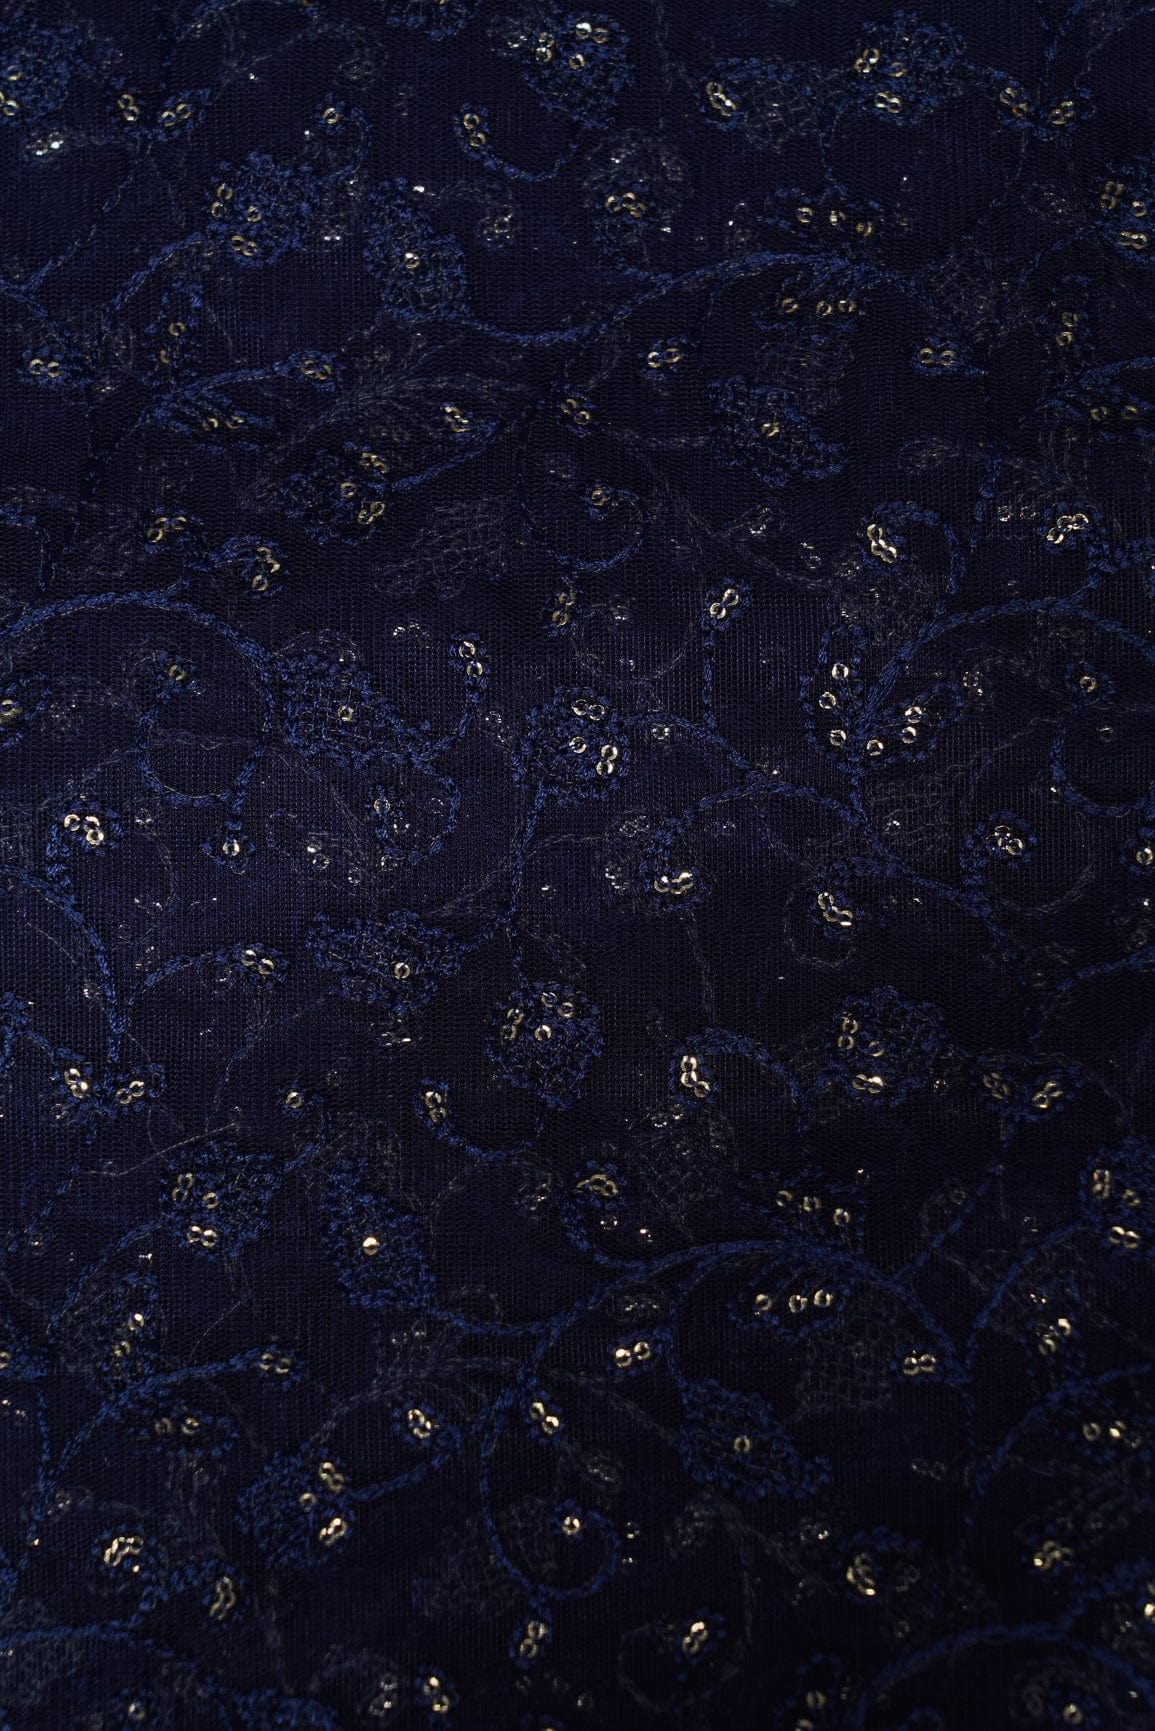 doeraa Embroidery Fabrics Gold Sequins Navy Blue Thread work Embroidery On Navy Blue Soft Net Fabric